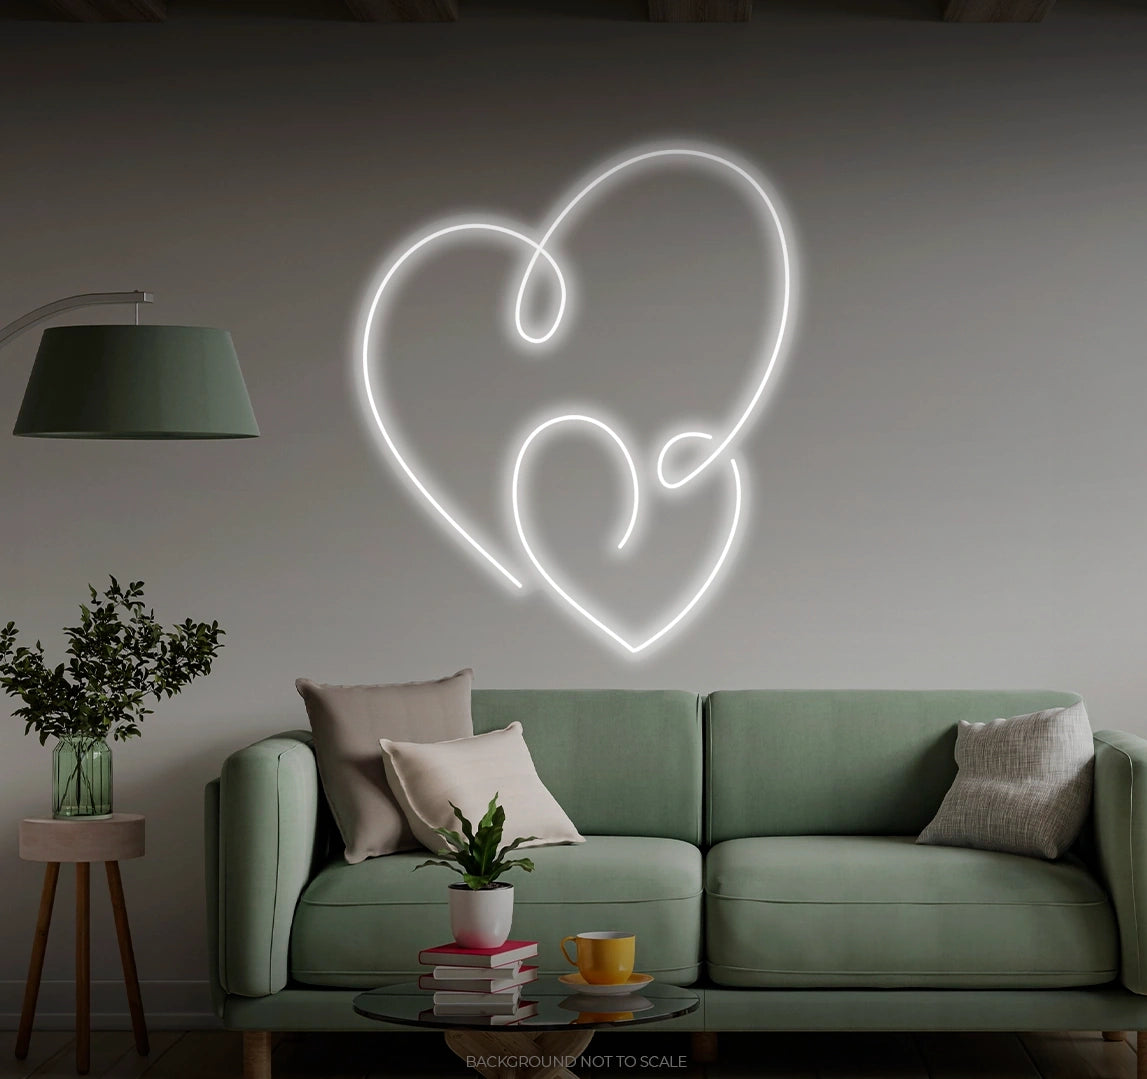 Intertwined two hearts LED neon